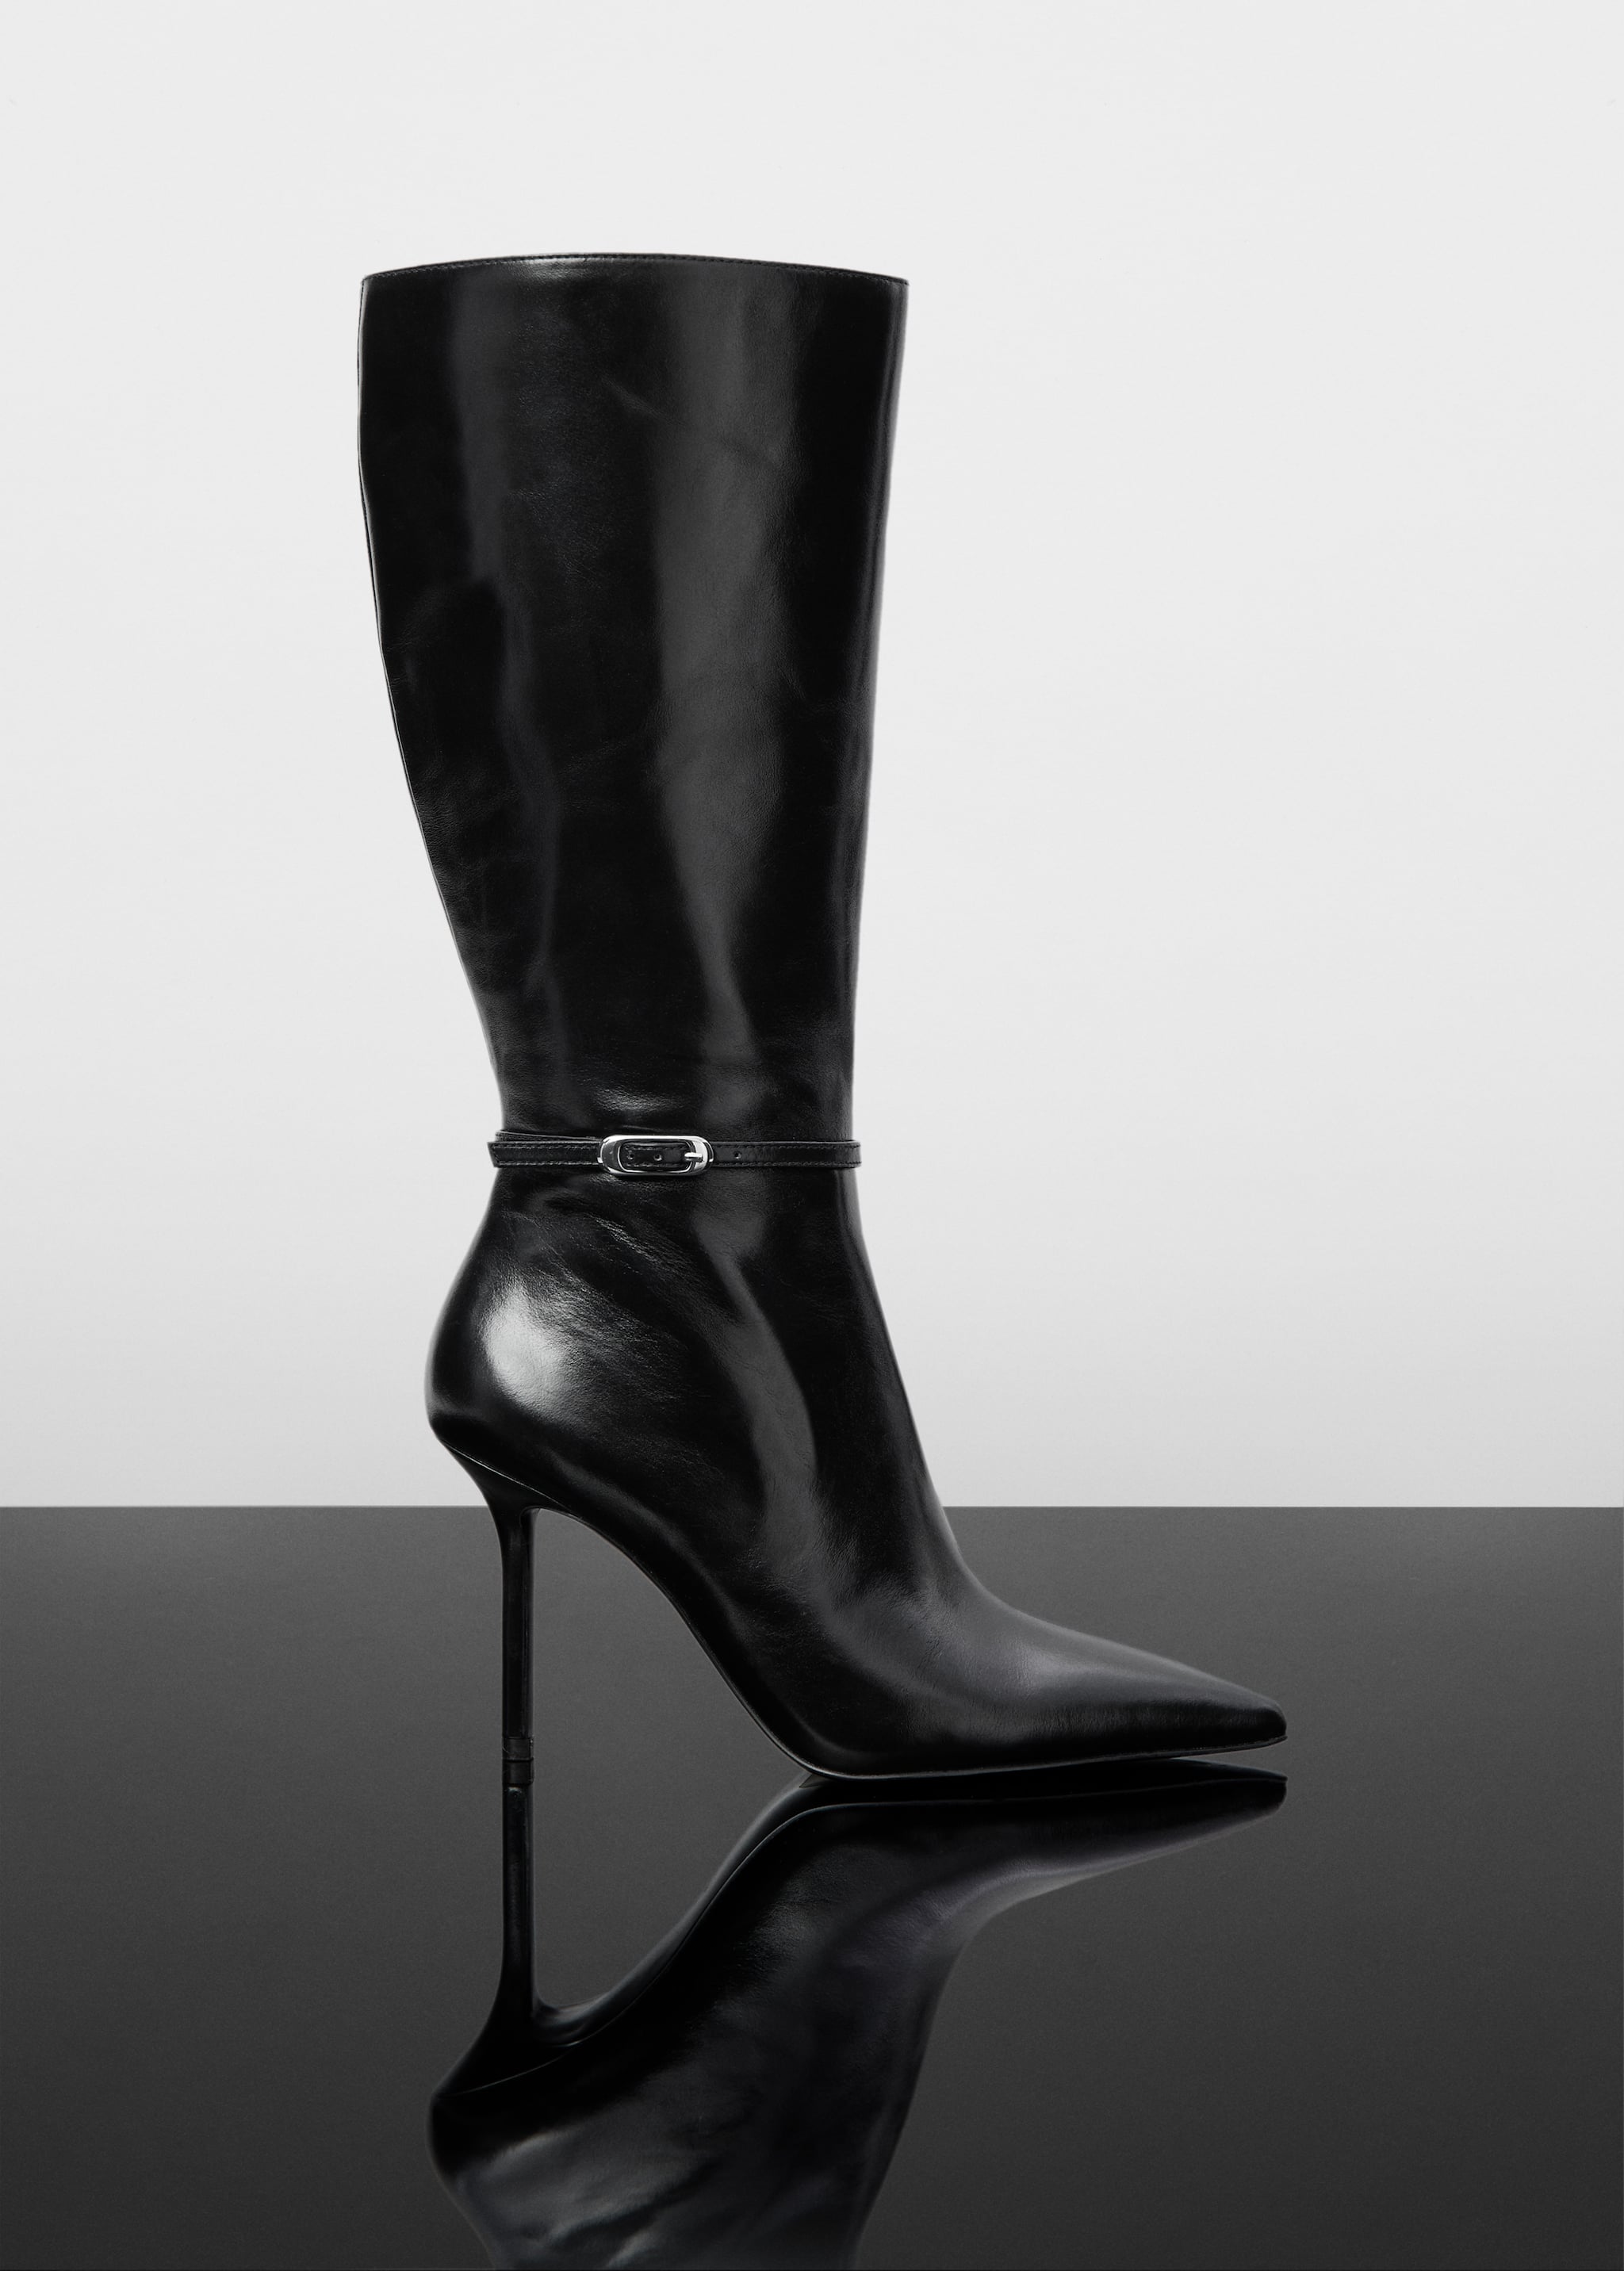 Heel leather boot - Article without model